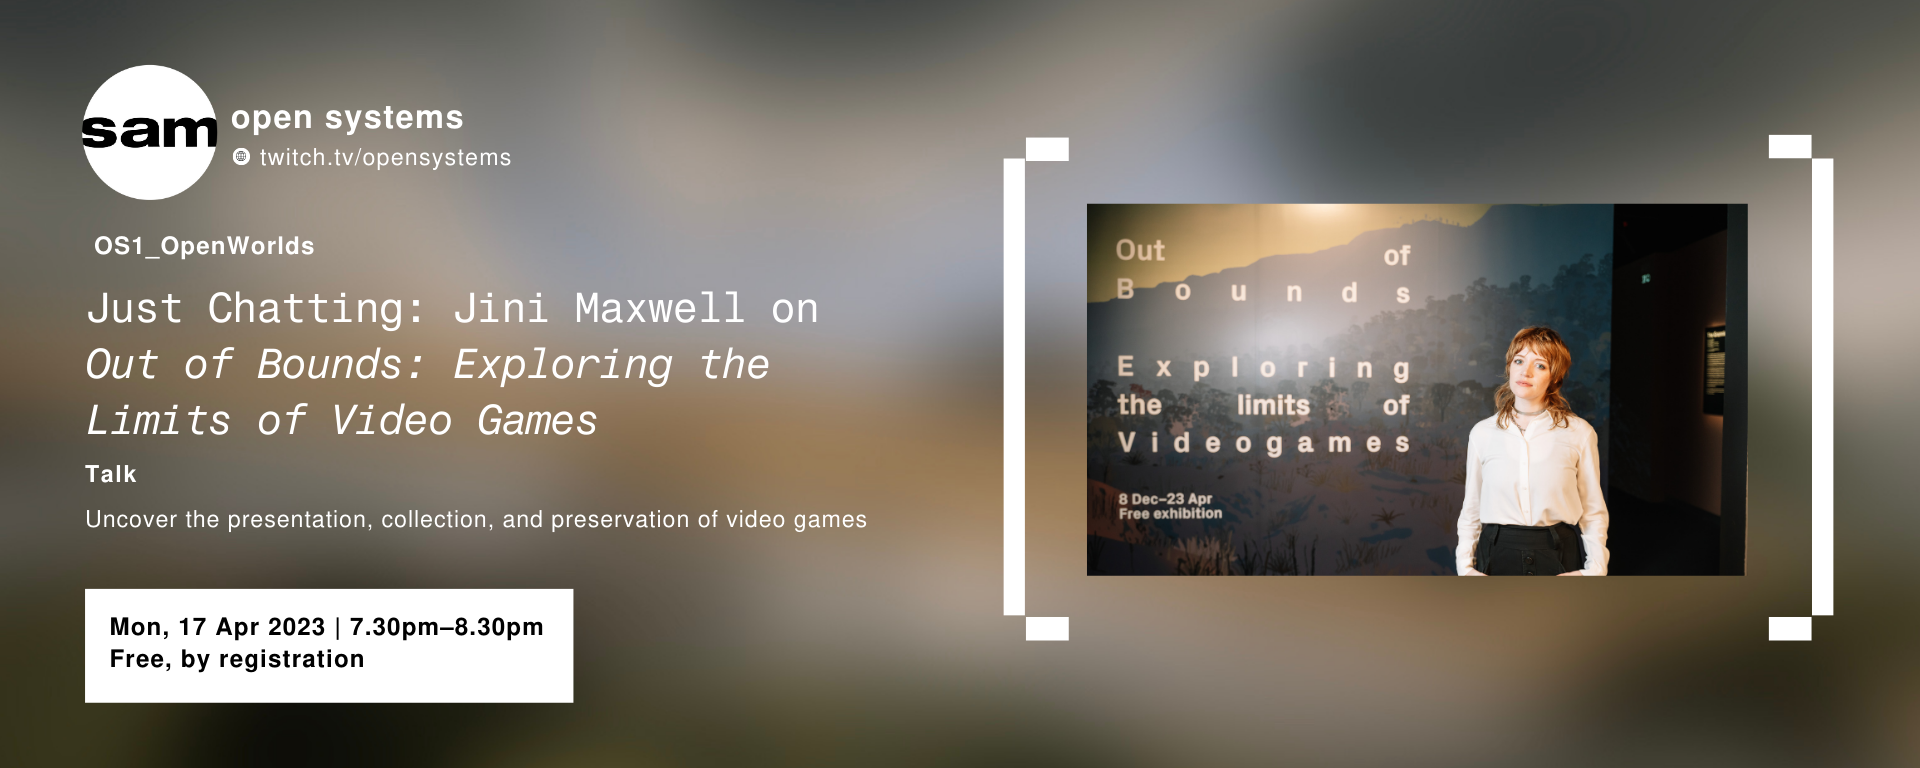 Just Chatting: Jini Maxwell on 'Out of Bounds: Exploring the Limits of Video Games'